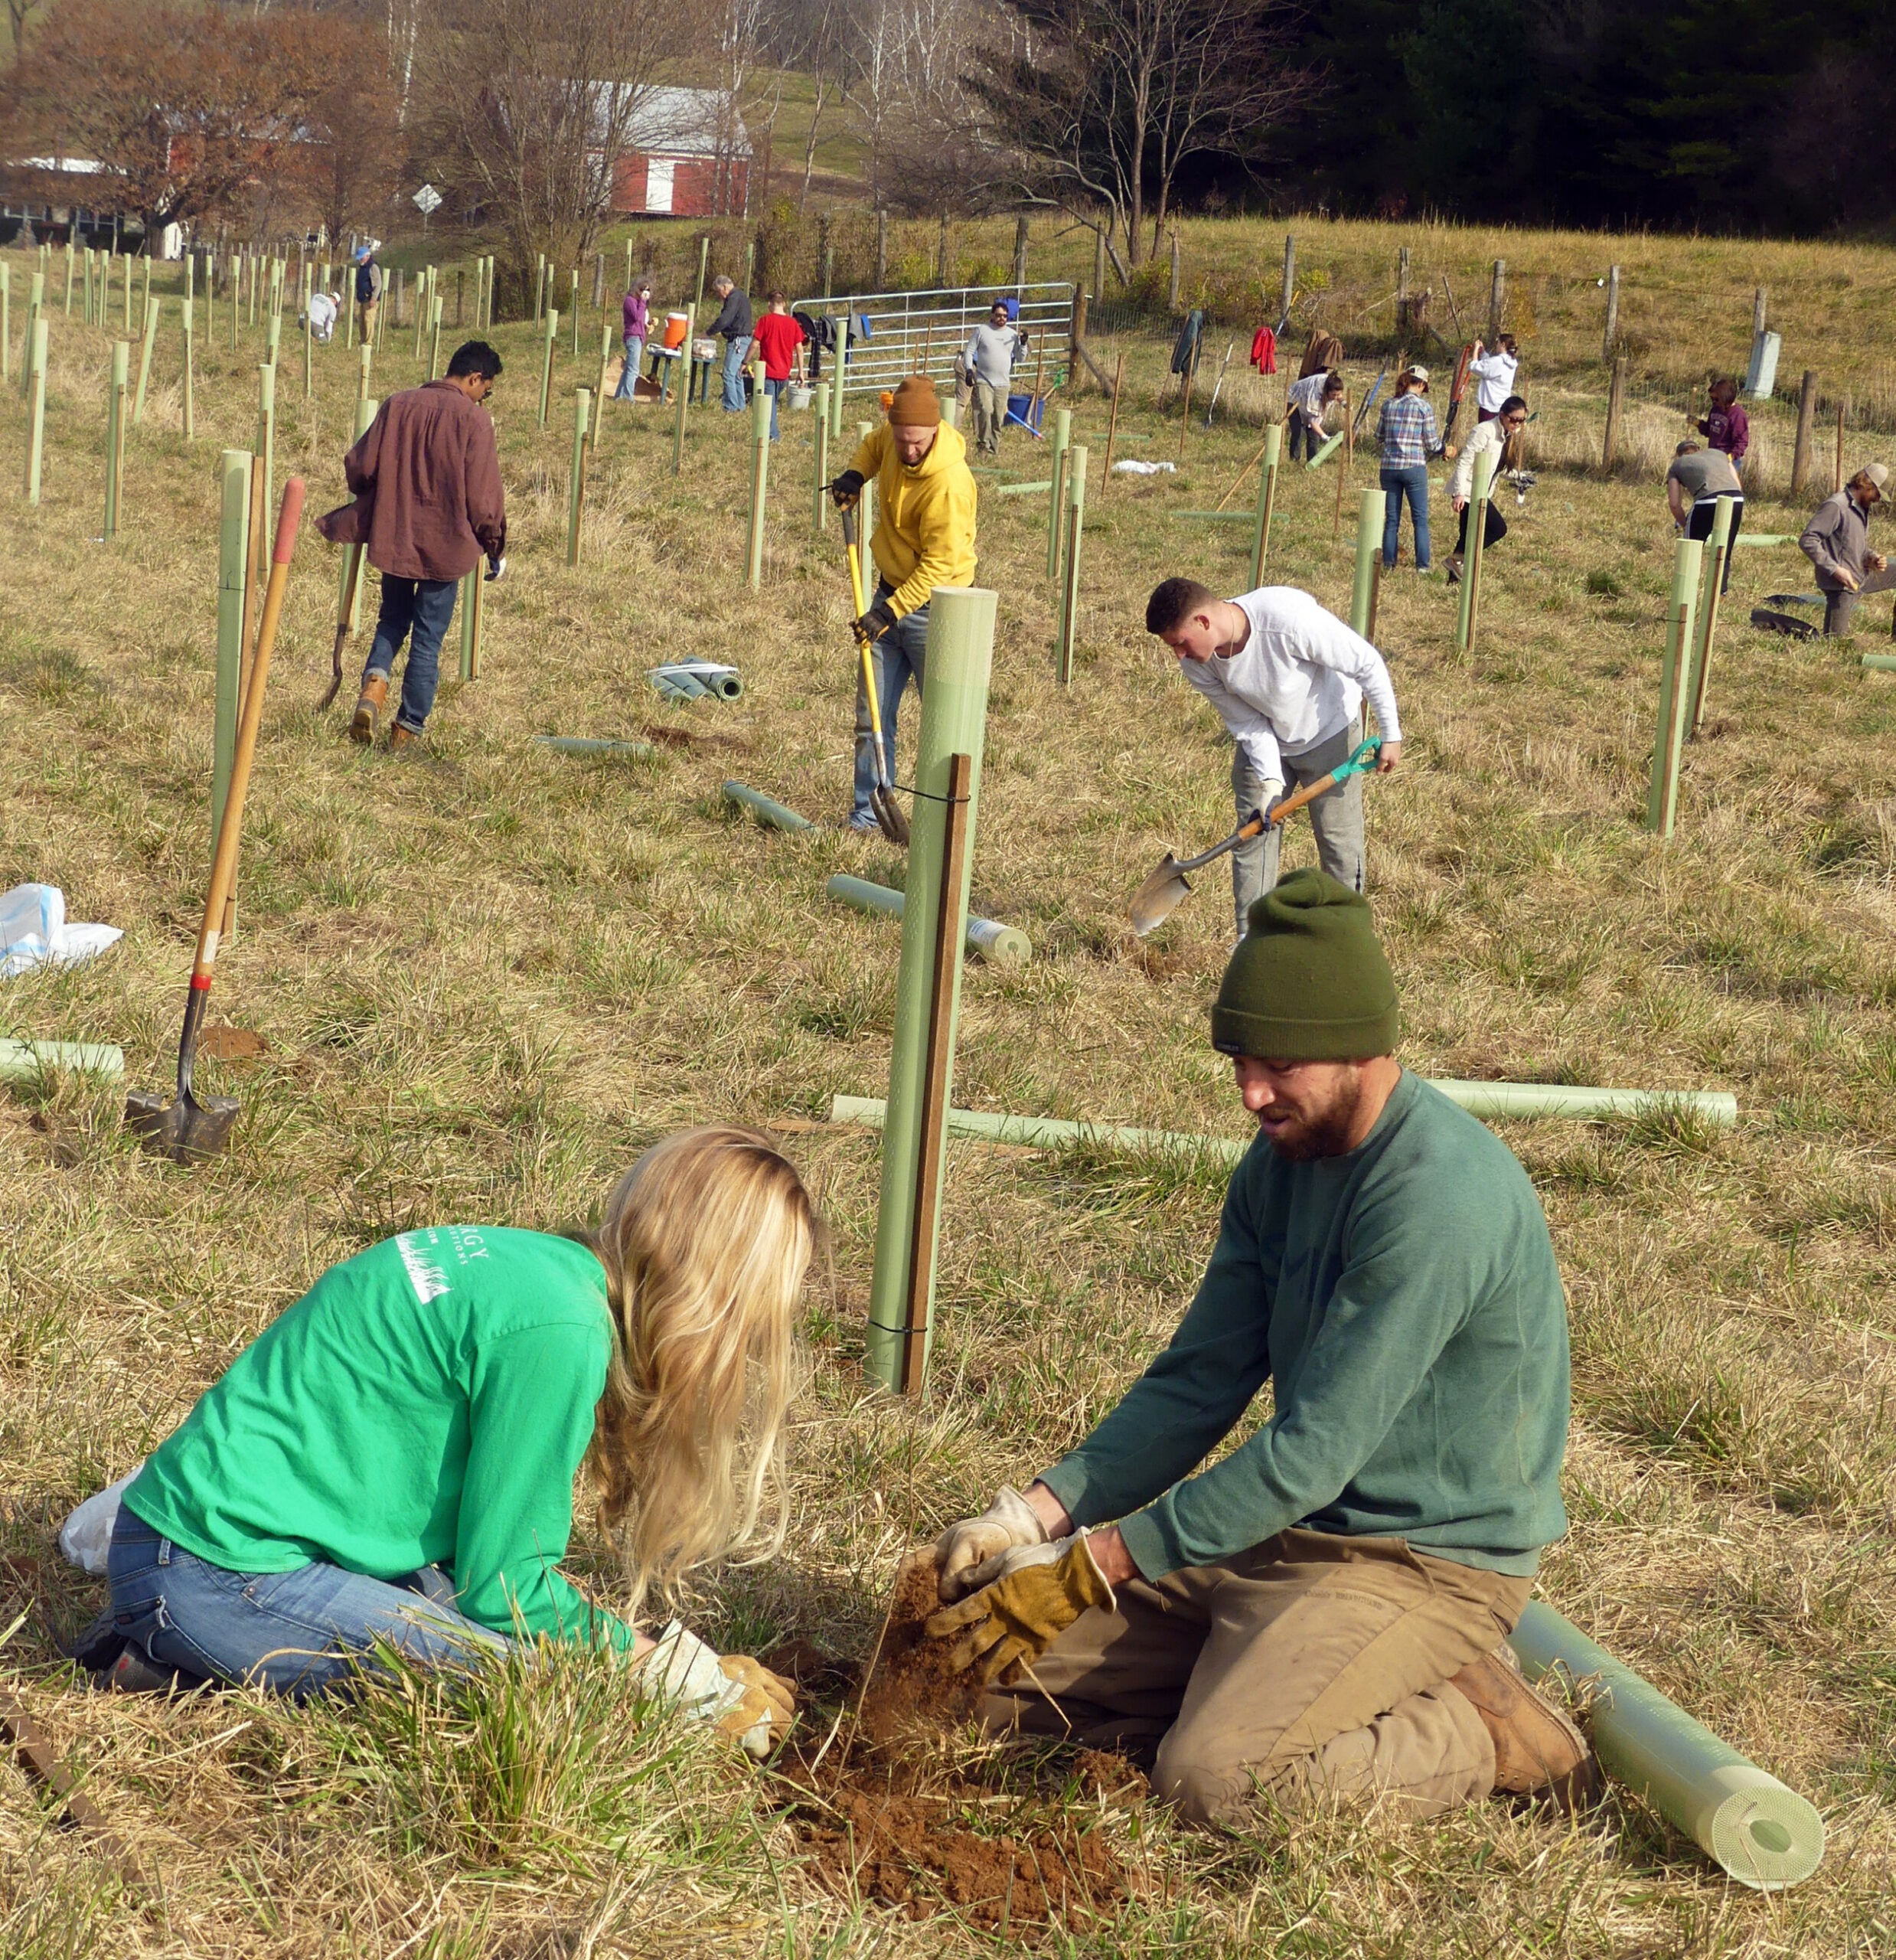 Many volunteers are planting trees and installing protective plastic sheaths in a large field.